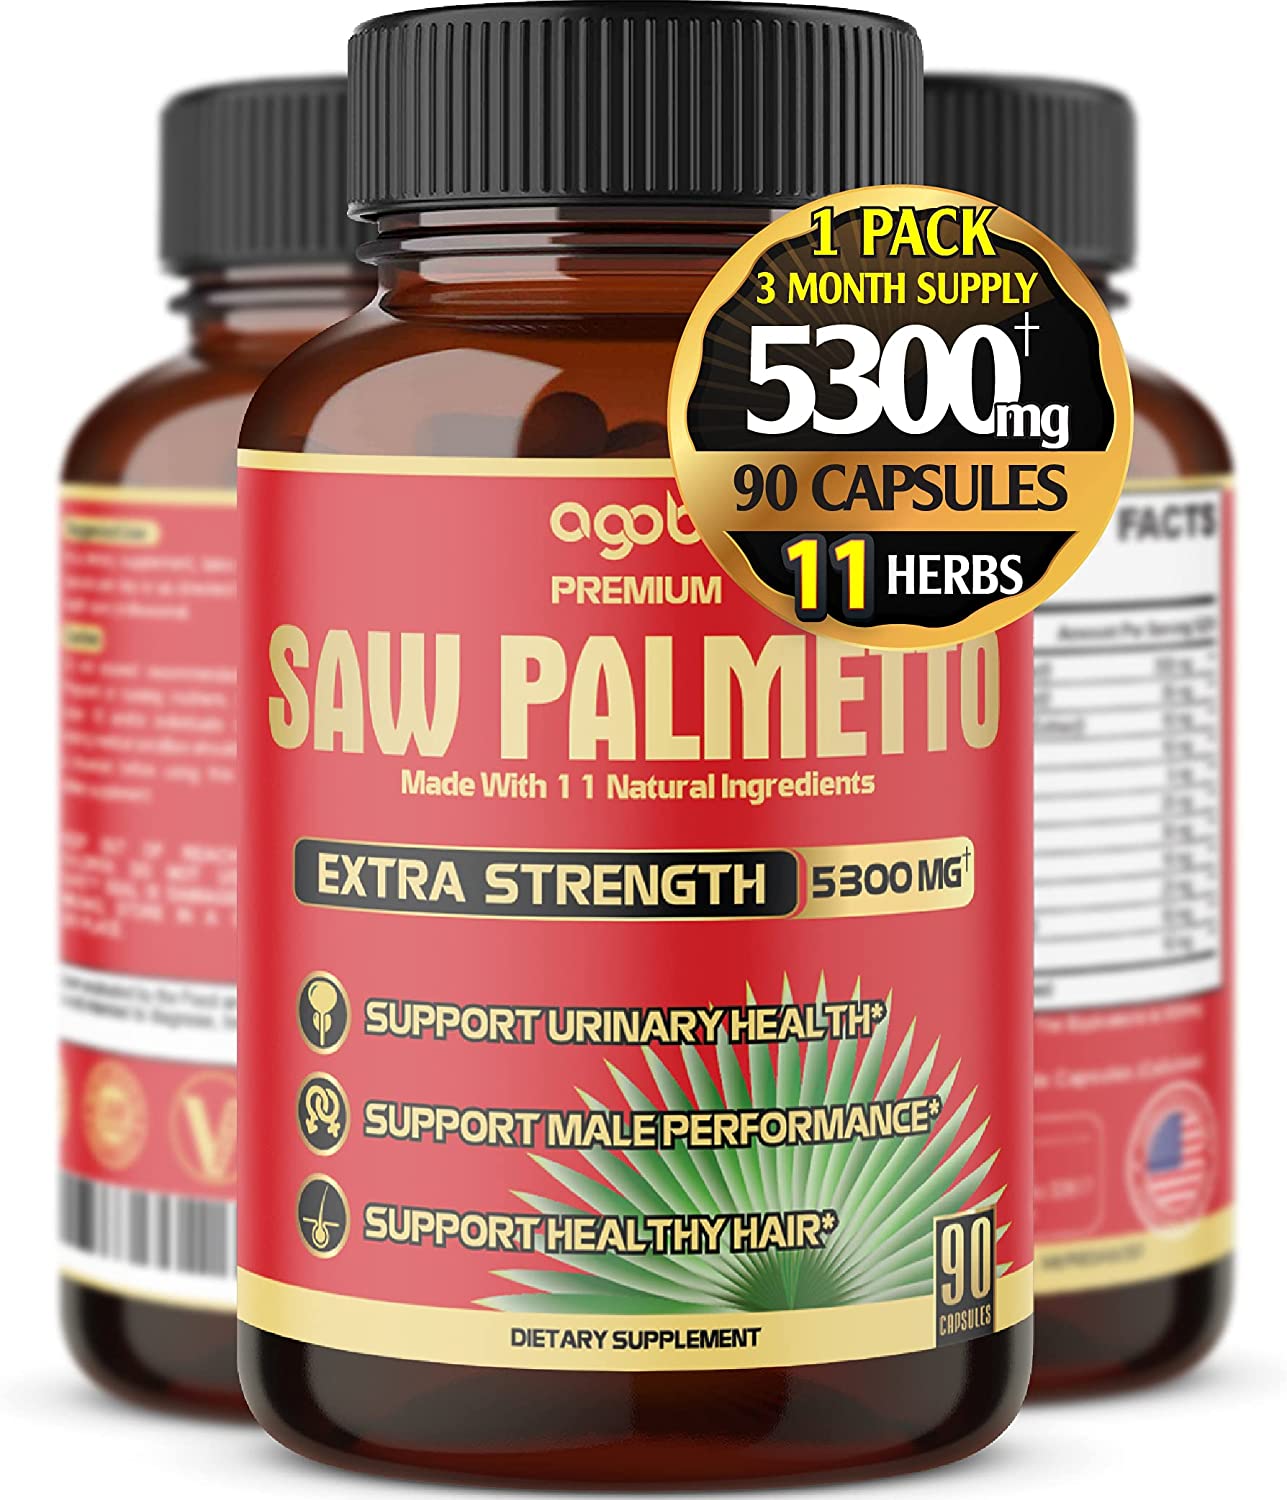 Premium Saw Palmetto Capsules - Equivalent To 5300mg Combined With Ashwagandha, Turmeric, Tribulus, Maca, Green Tea, Ginger, Holy Basil & More - Natural Prostate Support